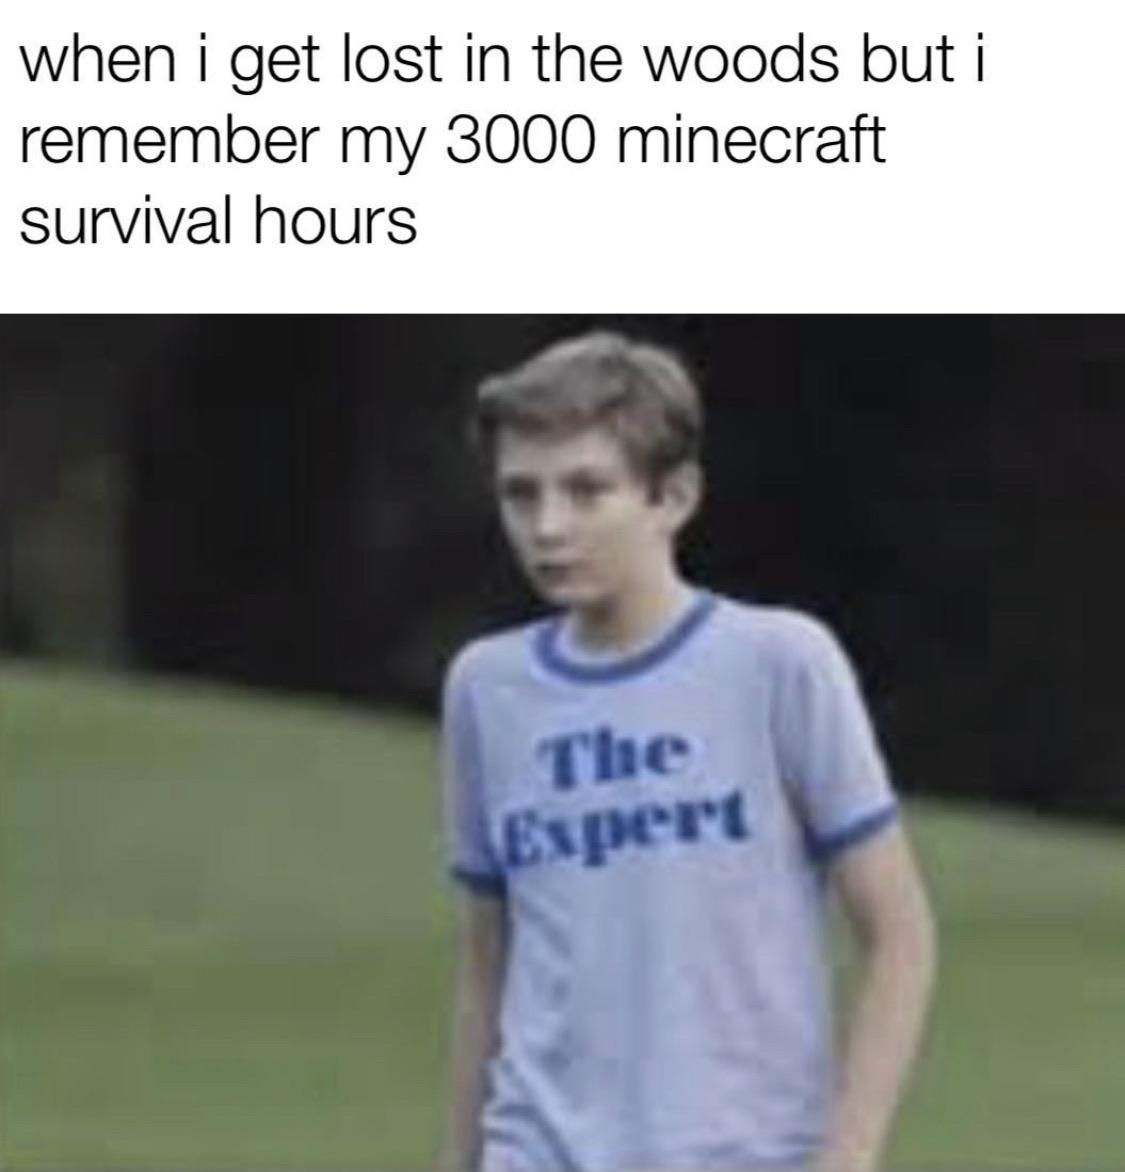 Dank Meme dank-memes cute text: when i get lost in the woods but i remember my 3000 minecraft survival hours lespert 